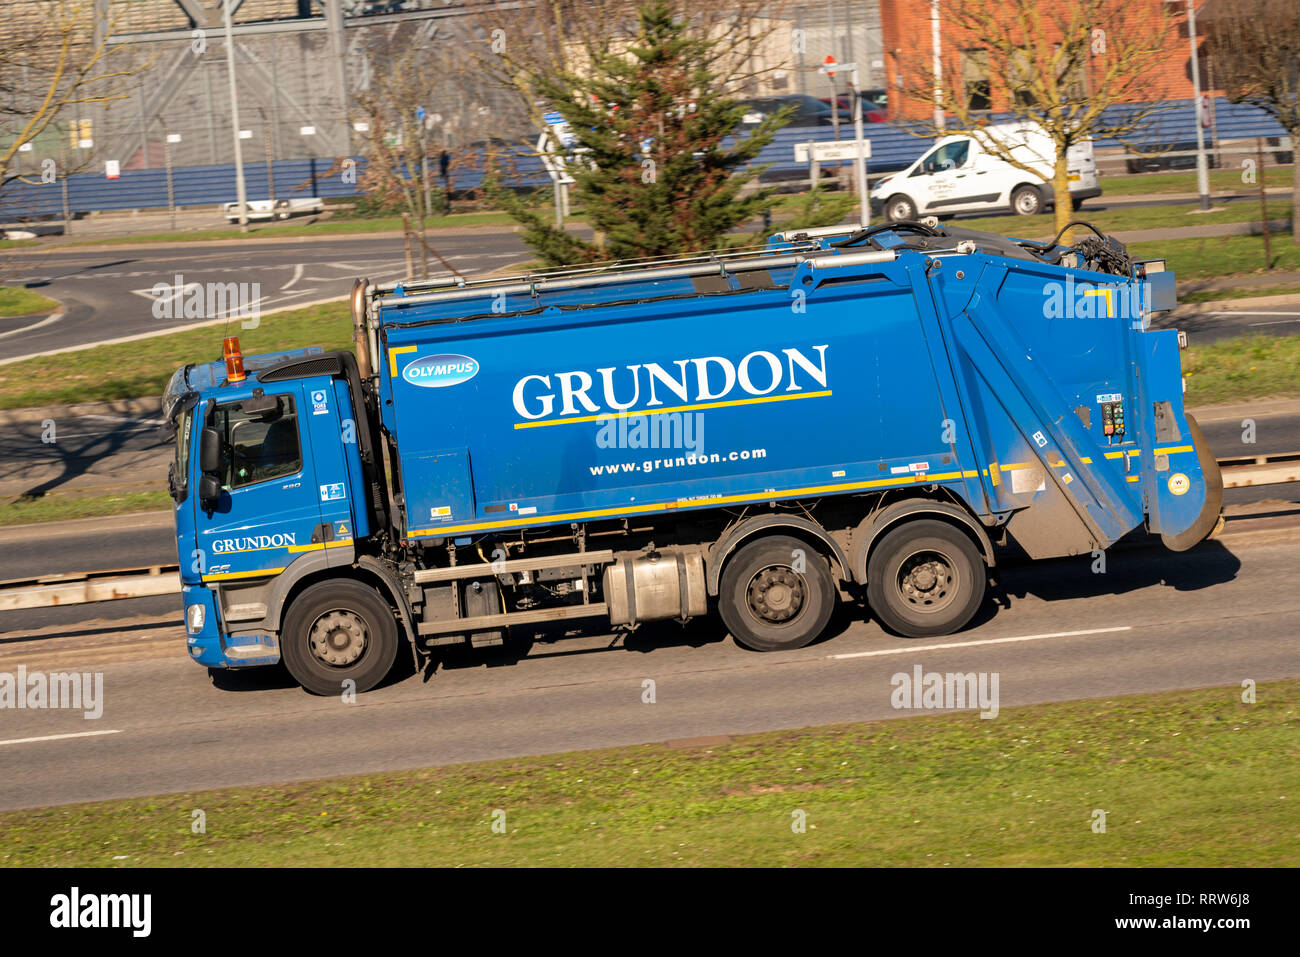 Grundon rubbish truck, Refuse lorry driving on the road. Grundon Waste Management Ltd blue Dennis Eagle with Olympus body vehicle bin lorry Stock Photo